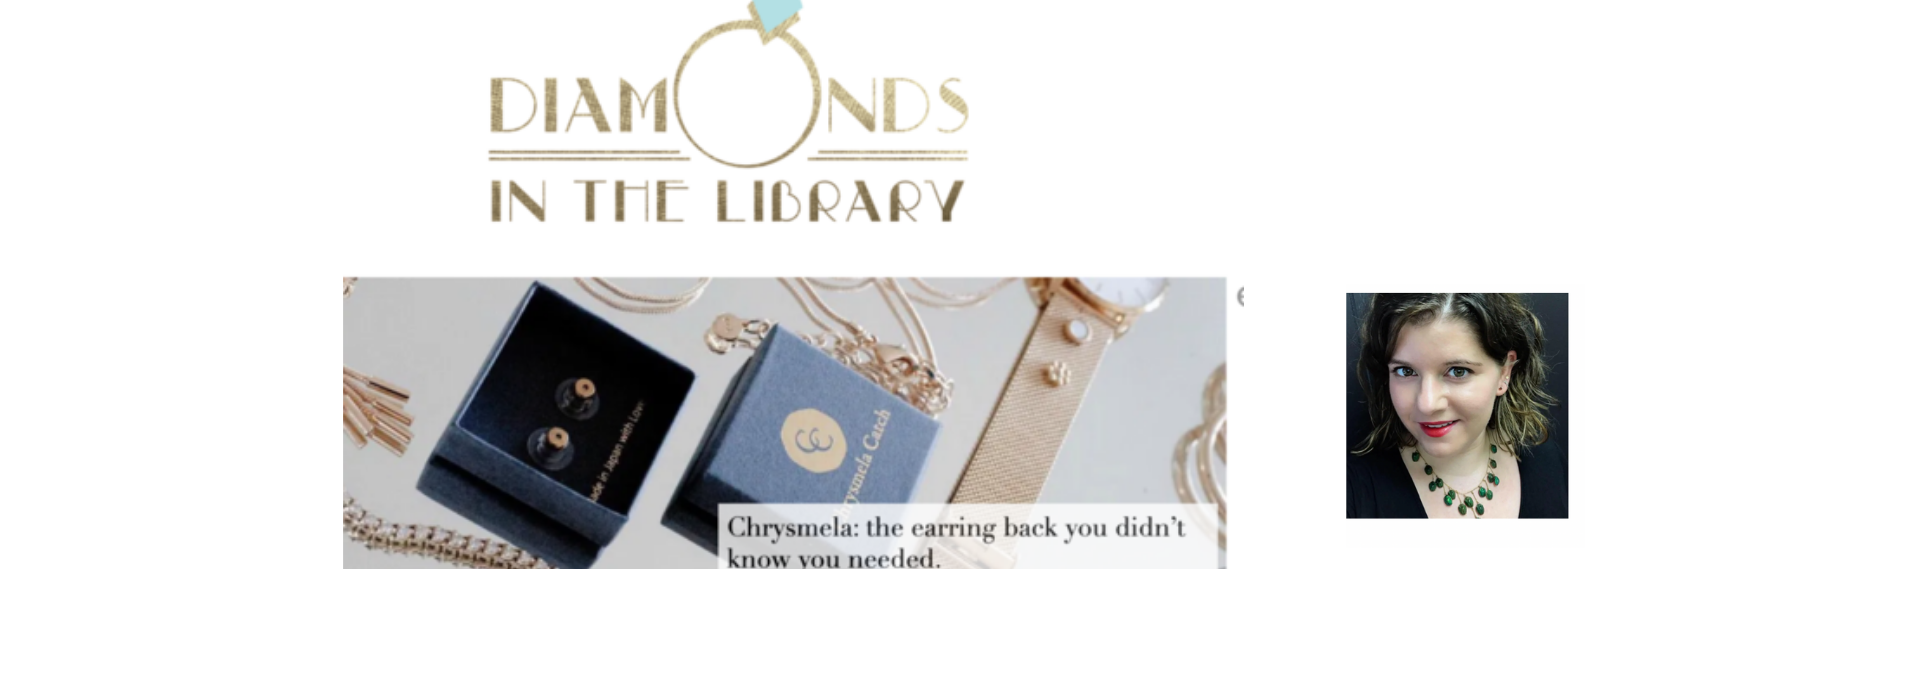 Jewelry industry blogger Diamonds In The Library tested and reviewed Chrysmela the most secure earring back on her fine jewelry collections of new and antique earrings